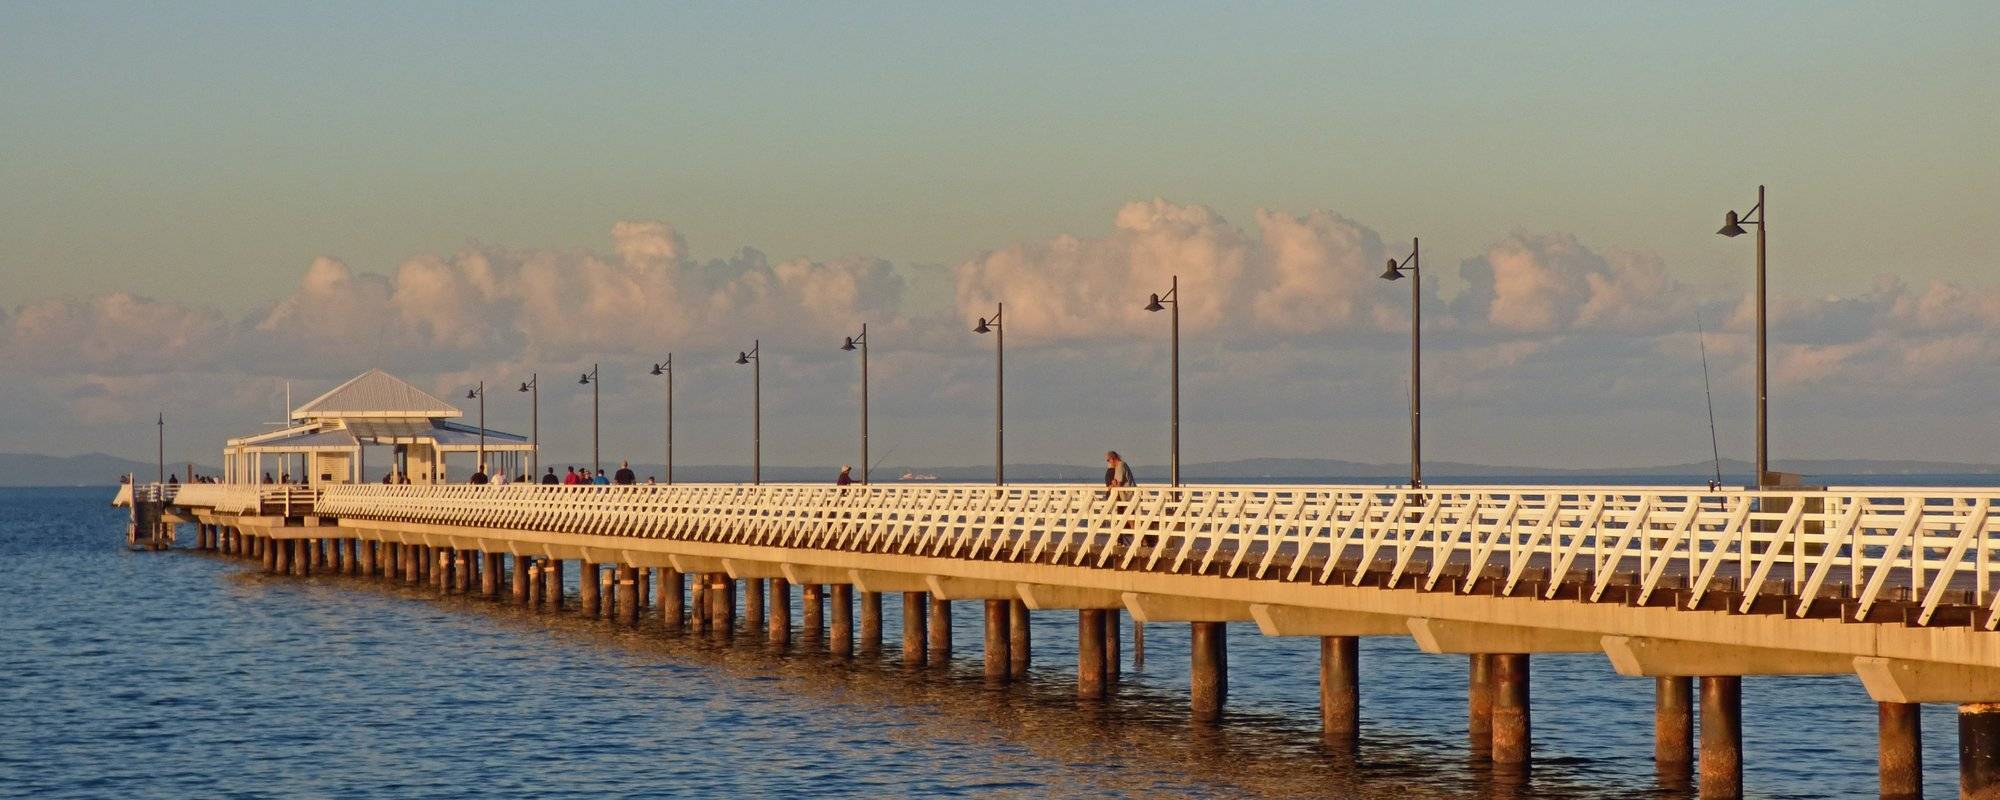 The Shorncliffe Pier. My Picture Day Round #32.